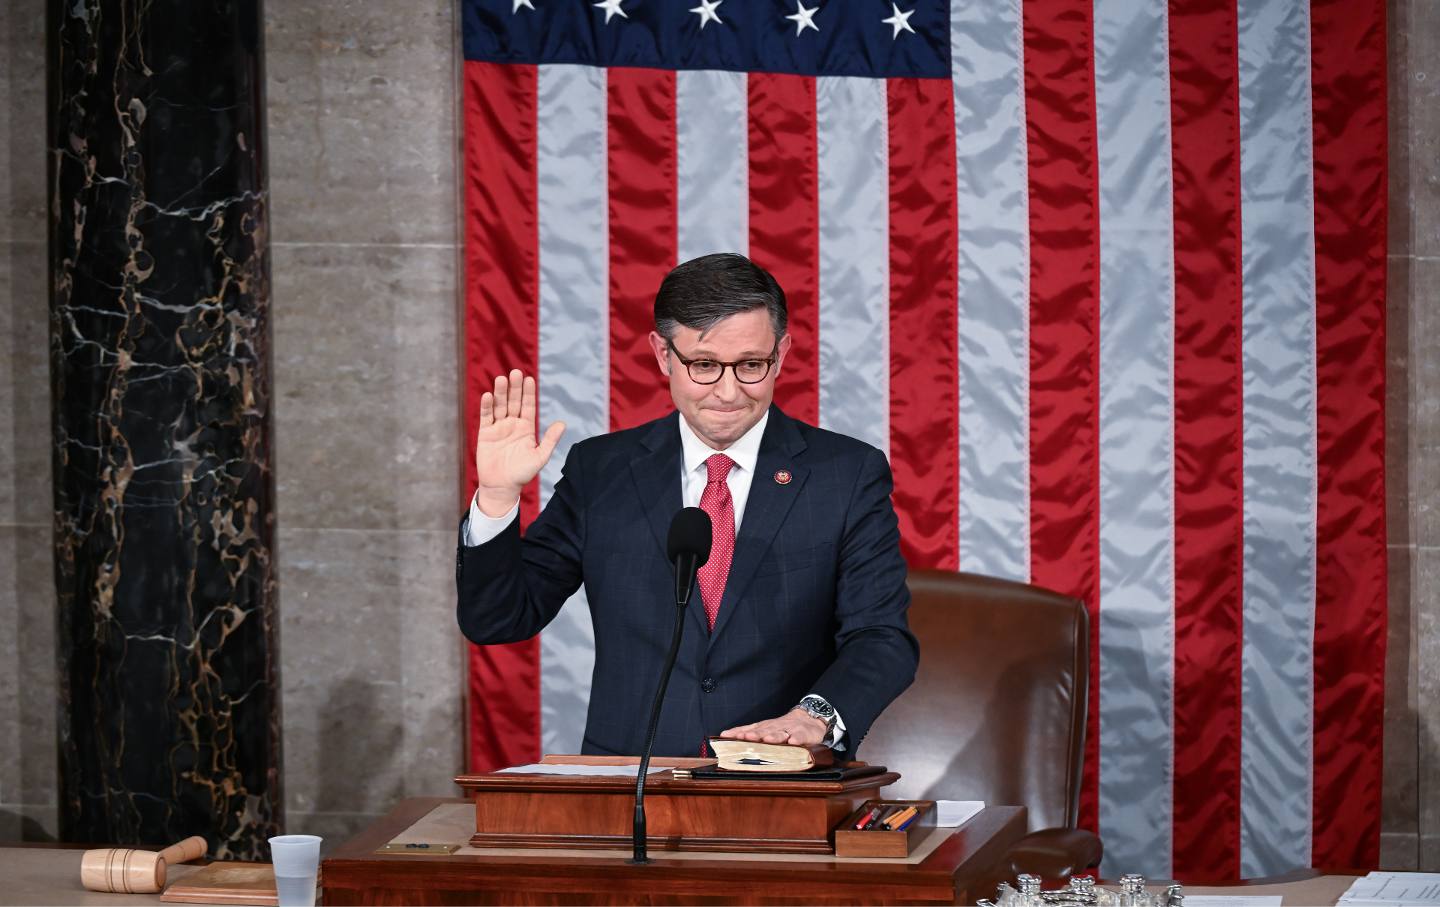 Speaker of the House Mike Johnson (R-LA) takes the oath in the House chambers as members of the House of Representatives